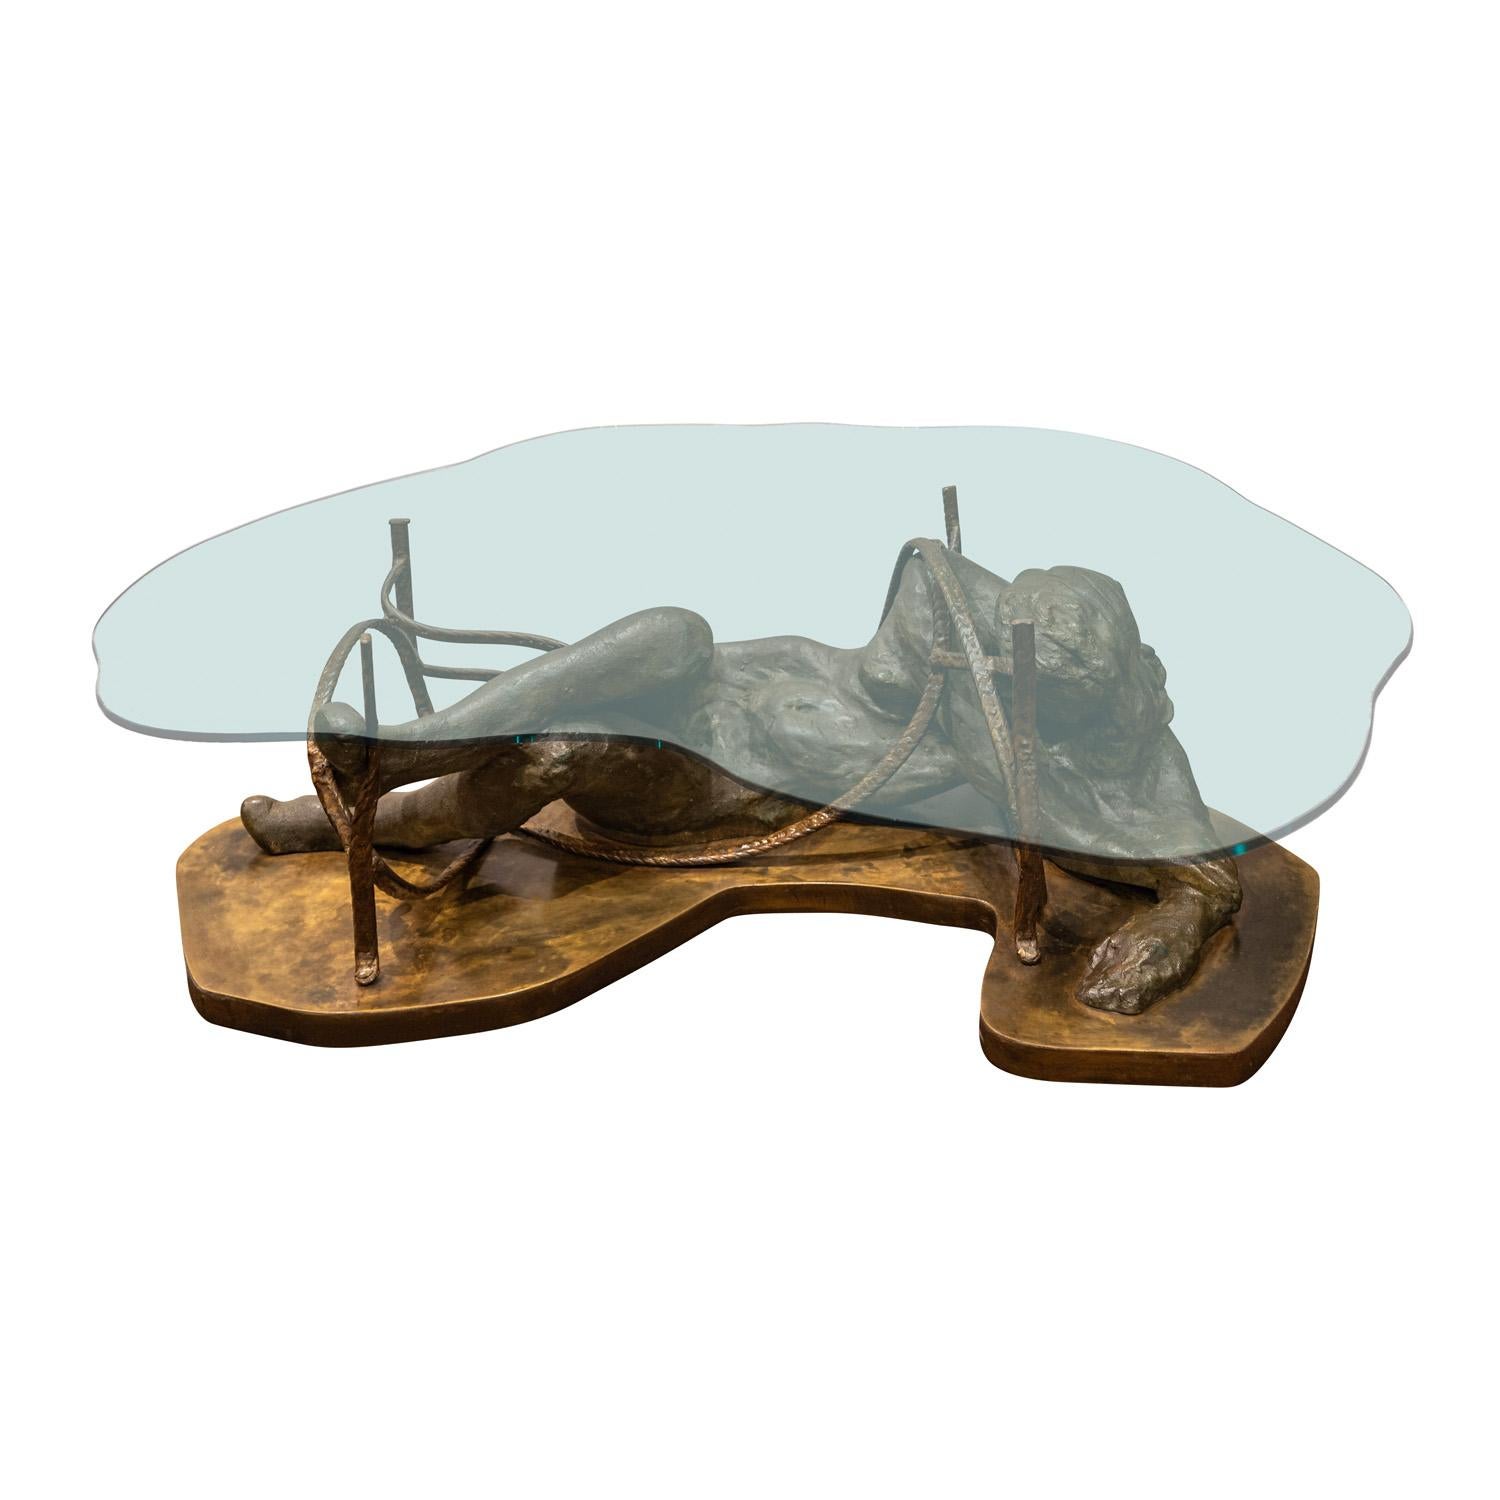 Rare and important “Repose” coffee table with cast bronze female nude on a patinated base with bronze tones,  welded cords and glass top by Philip & Kelvin LaVerne, American 1970s (signed “Philip Kelvin LaVerne” on base).  This was done in an